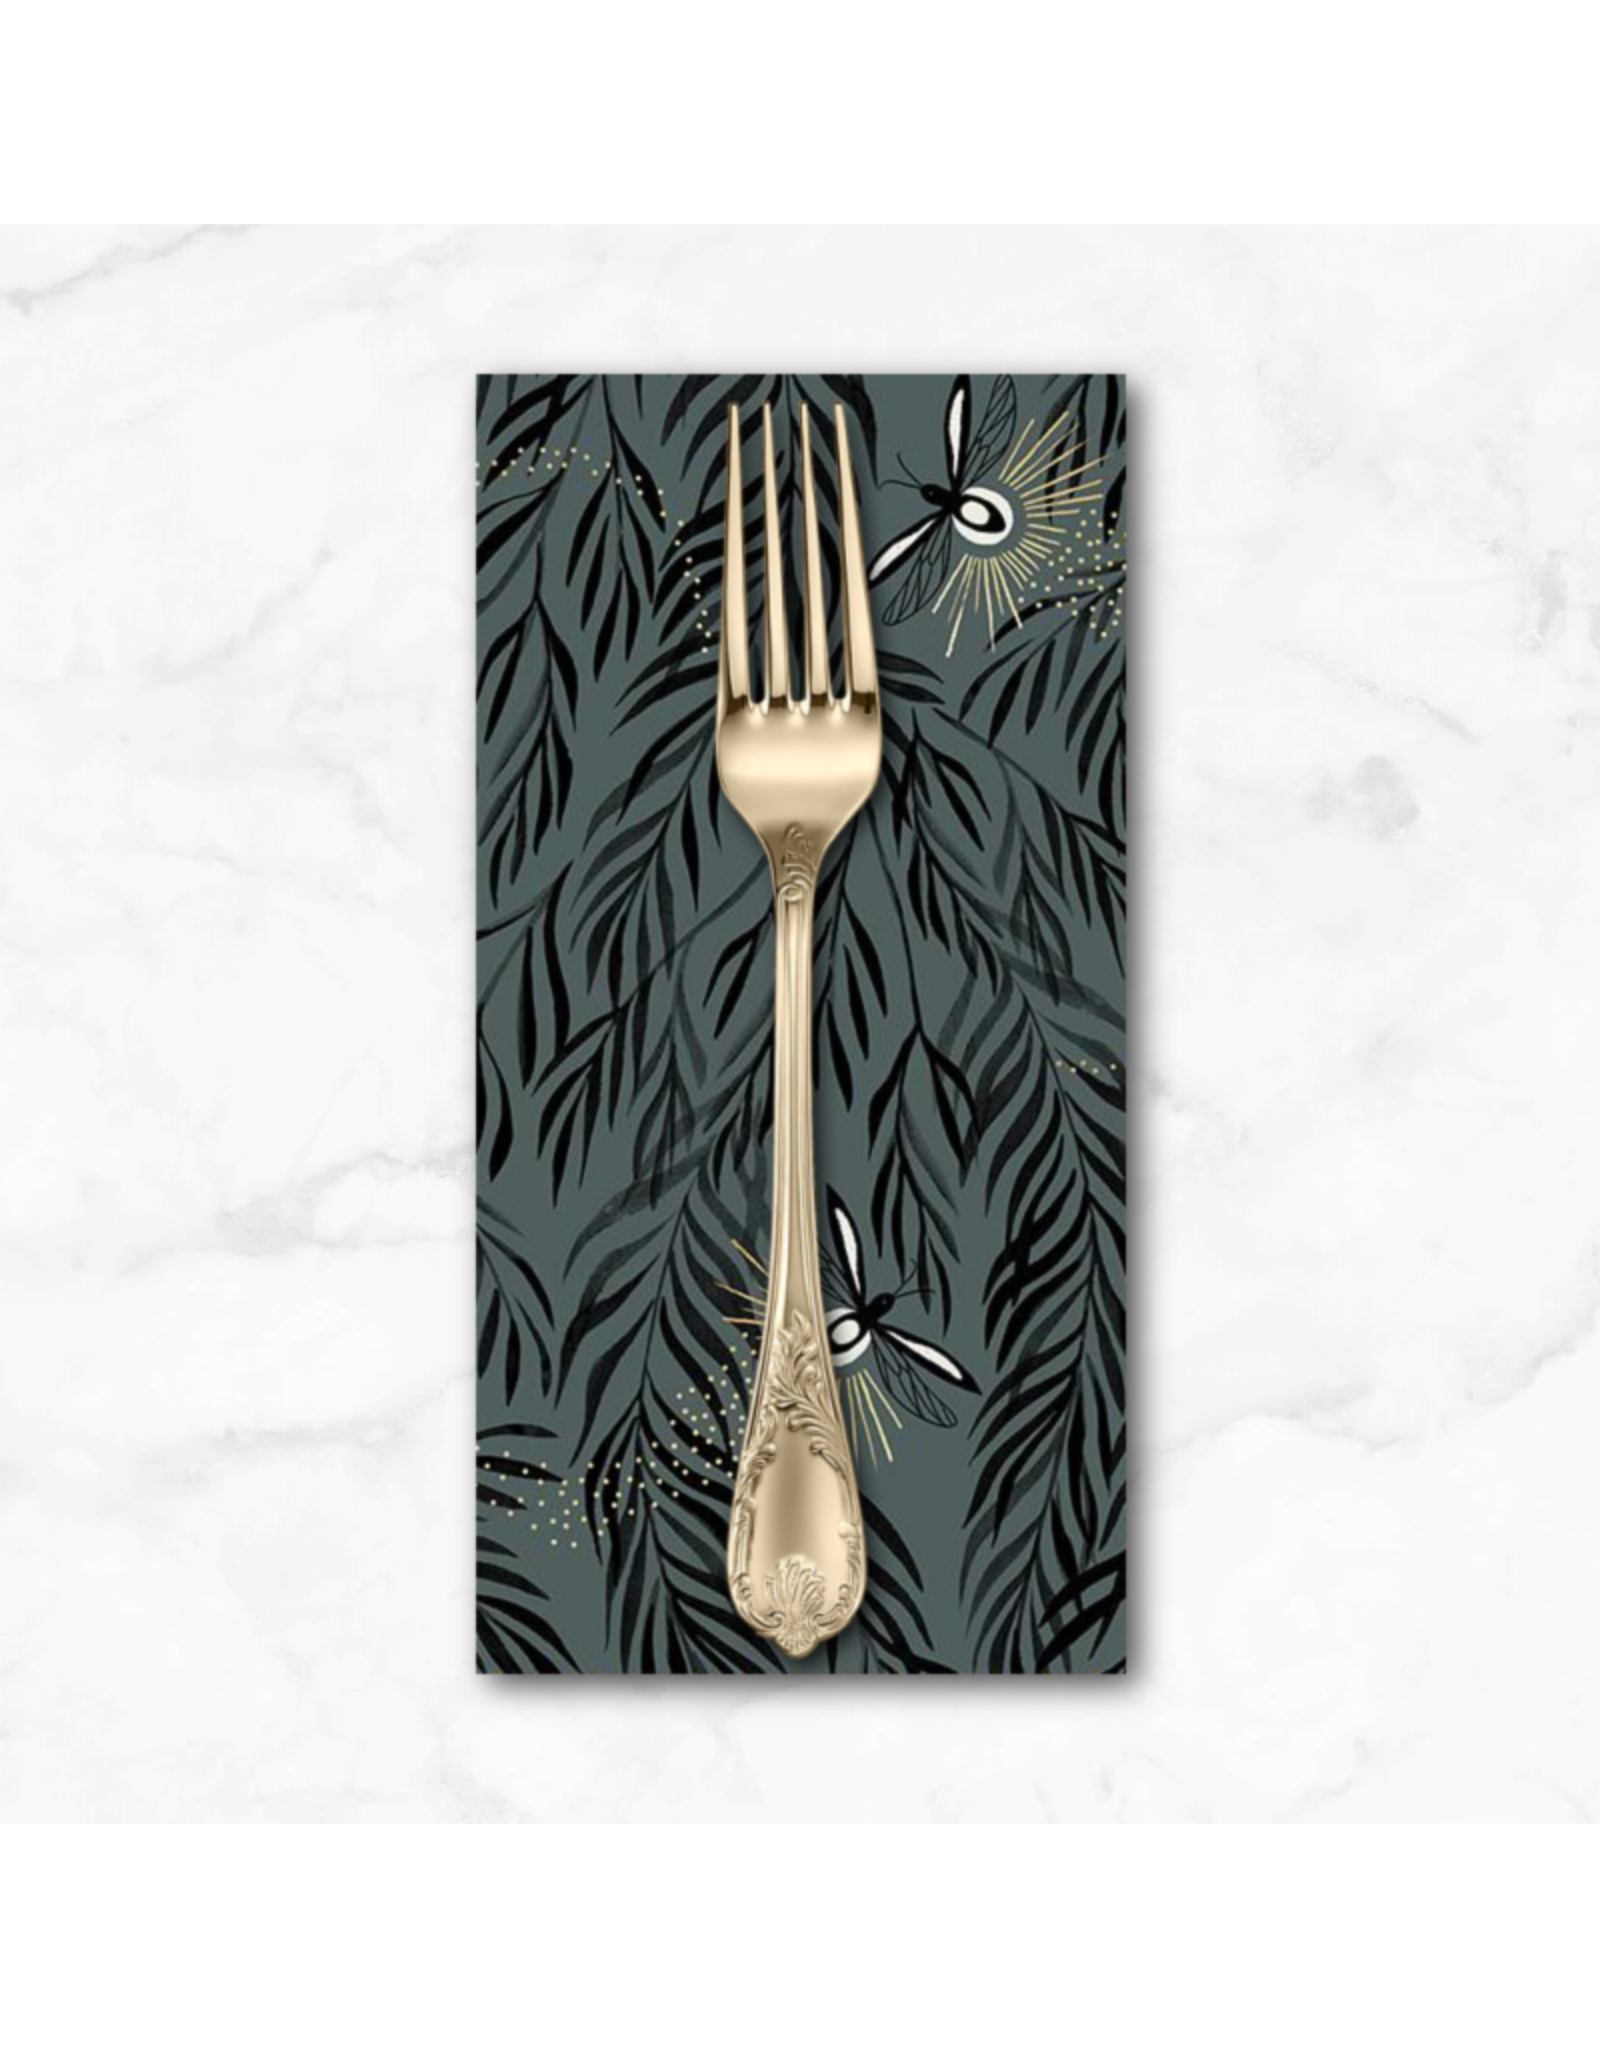 PD's Sarah Watts Collection Firefly, Willow in Dark Gray, Dinner Napkin